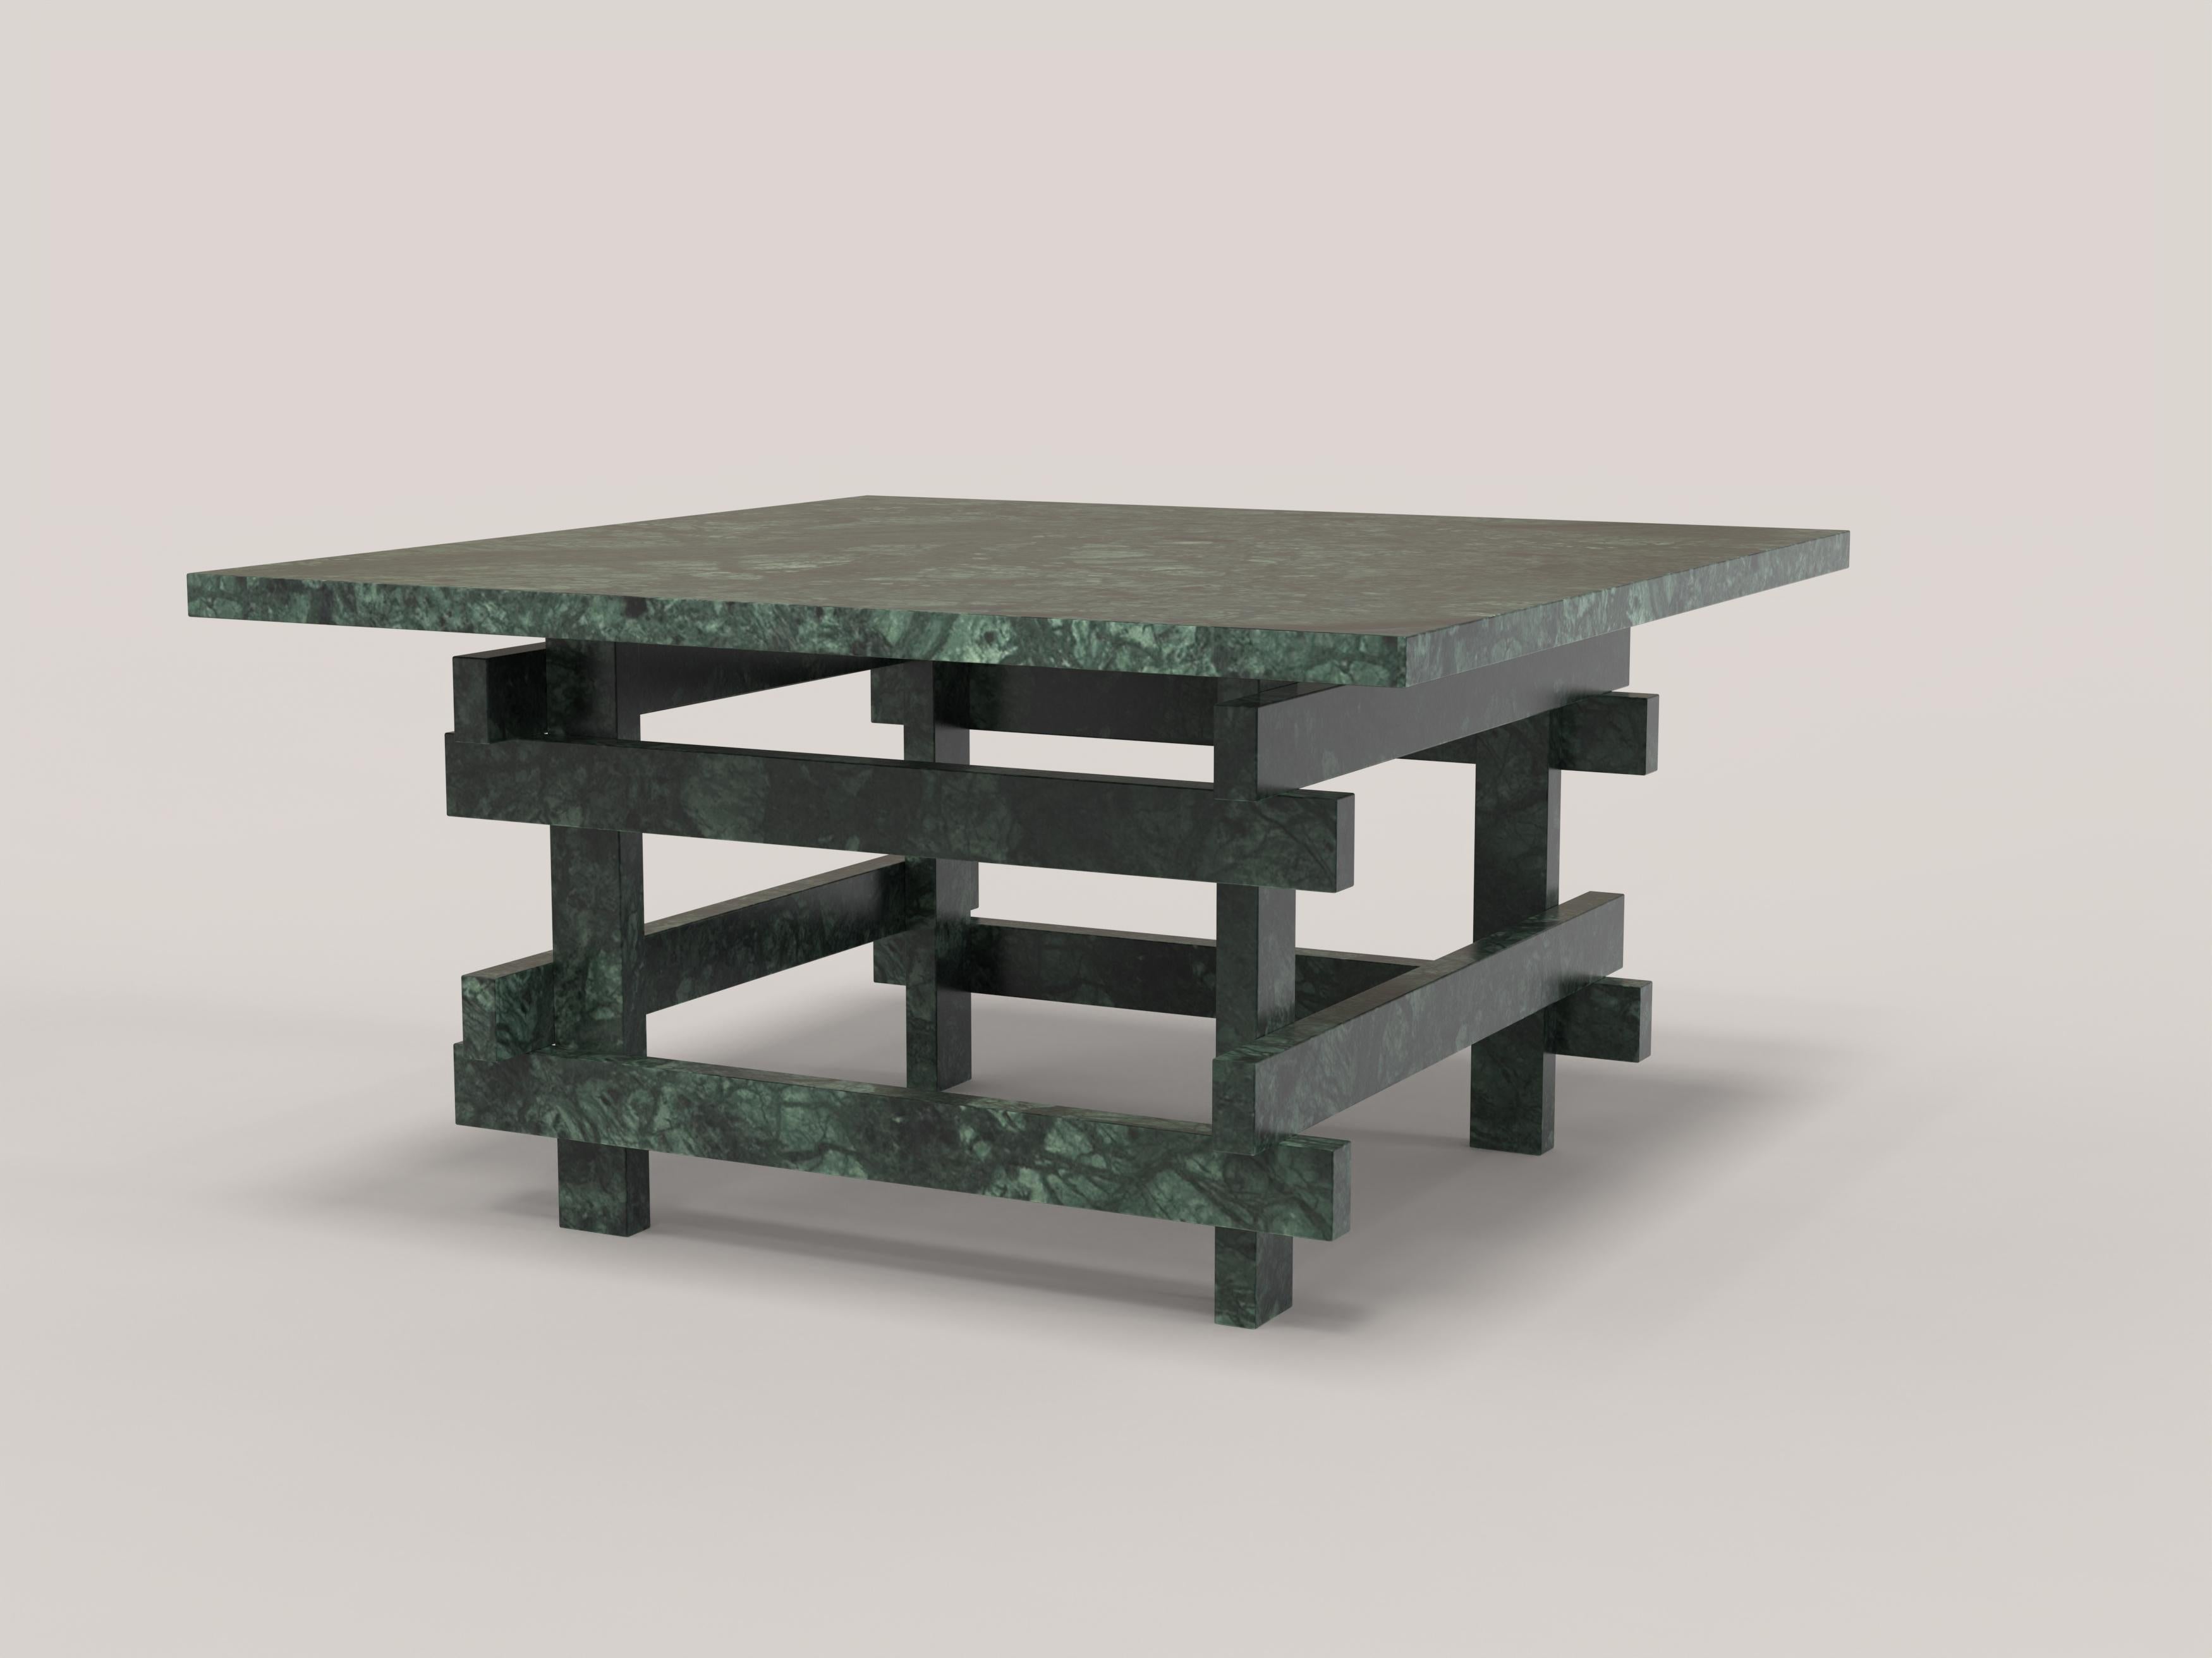 Paranoid V2 is a 21st Century sculptural low table made by Italian artisans in Green Guatemala marble. The piece is manufactured in a limited edition of 150 signed and progressively numbered examples. It is part of the collectible design language